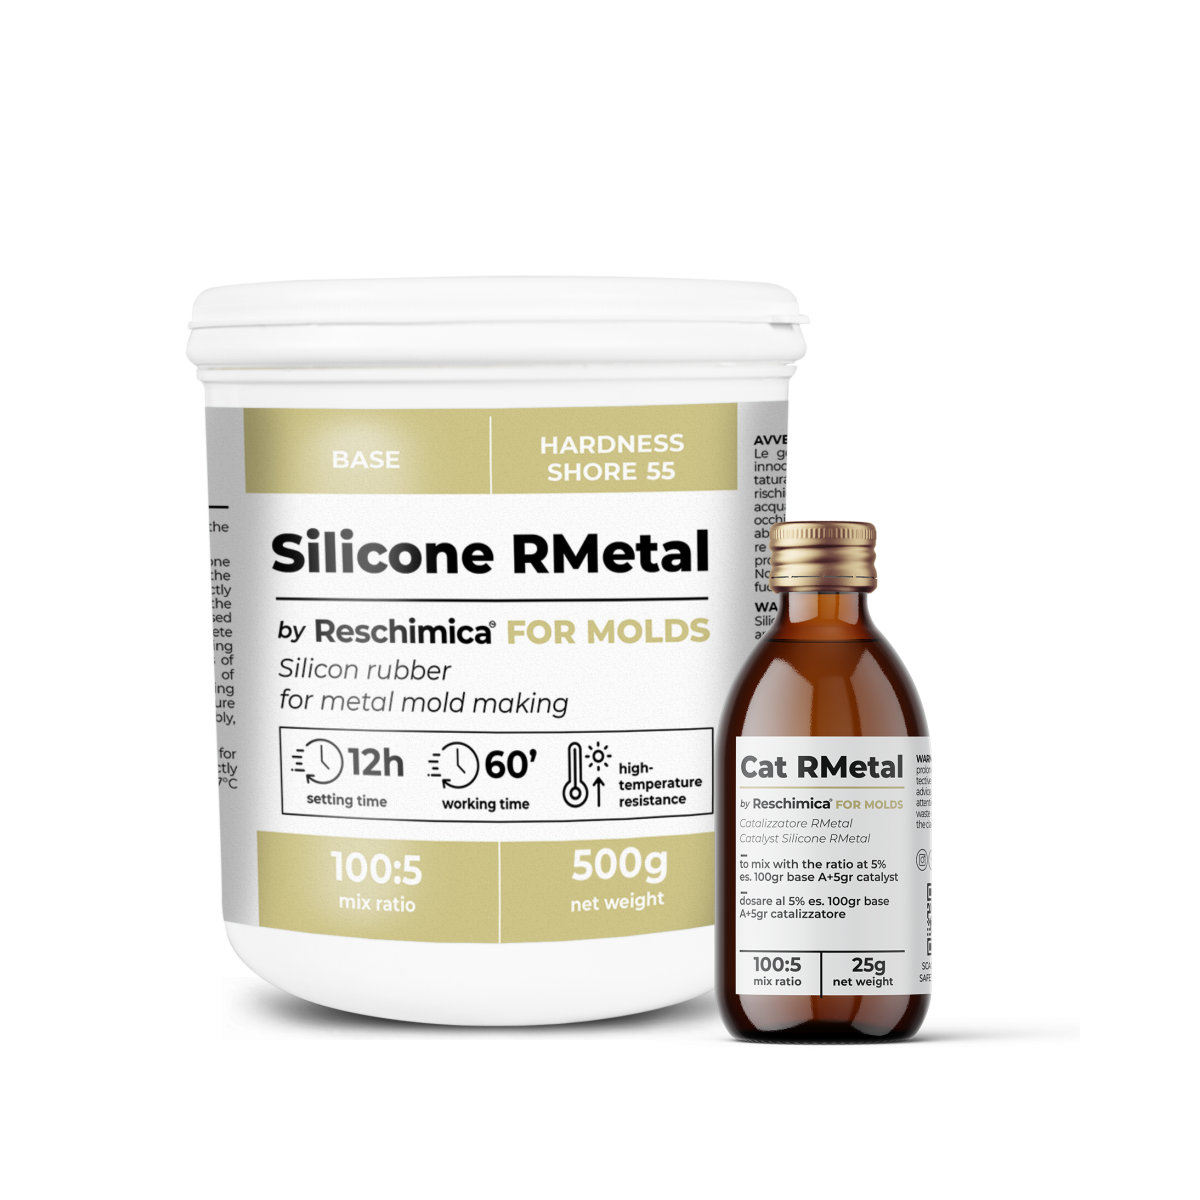 R METAL - Liquid silicone rubber resistant to high temperatures, ideal for metal moulds